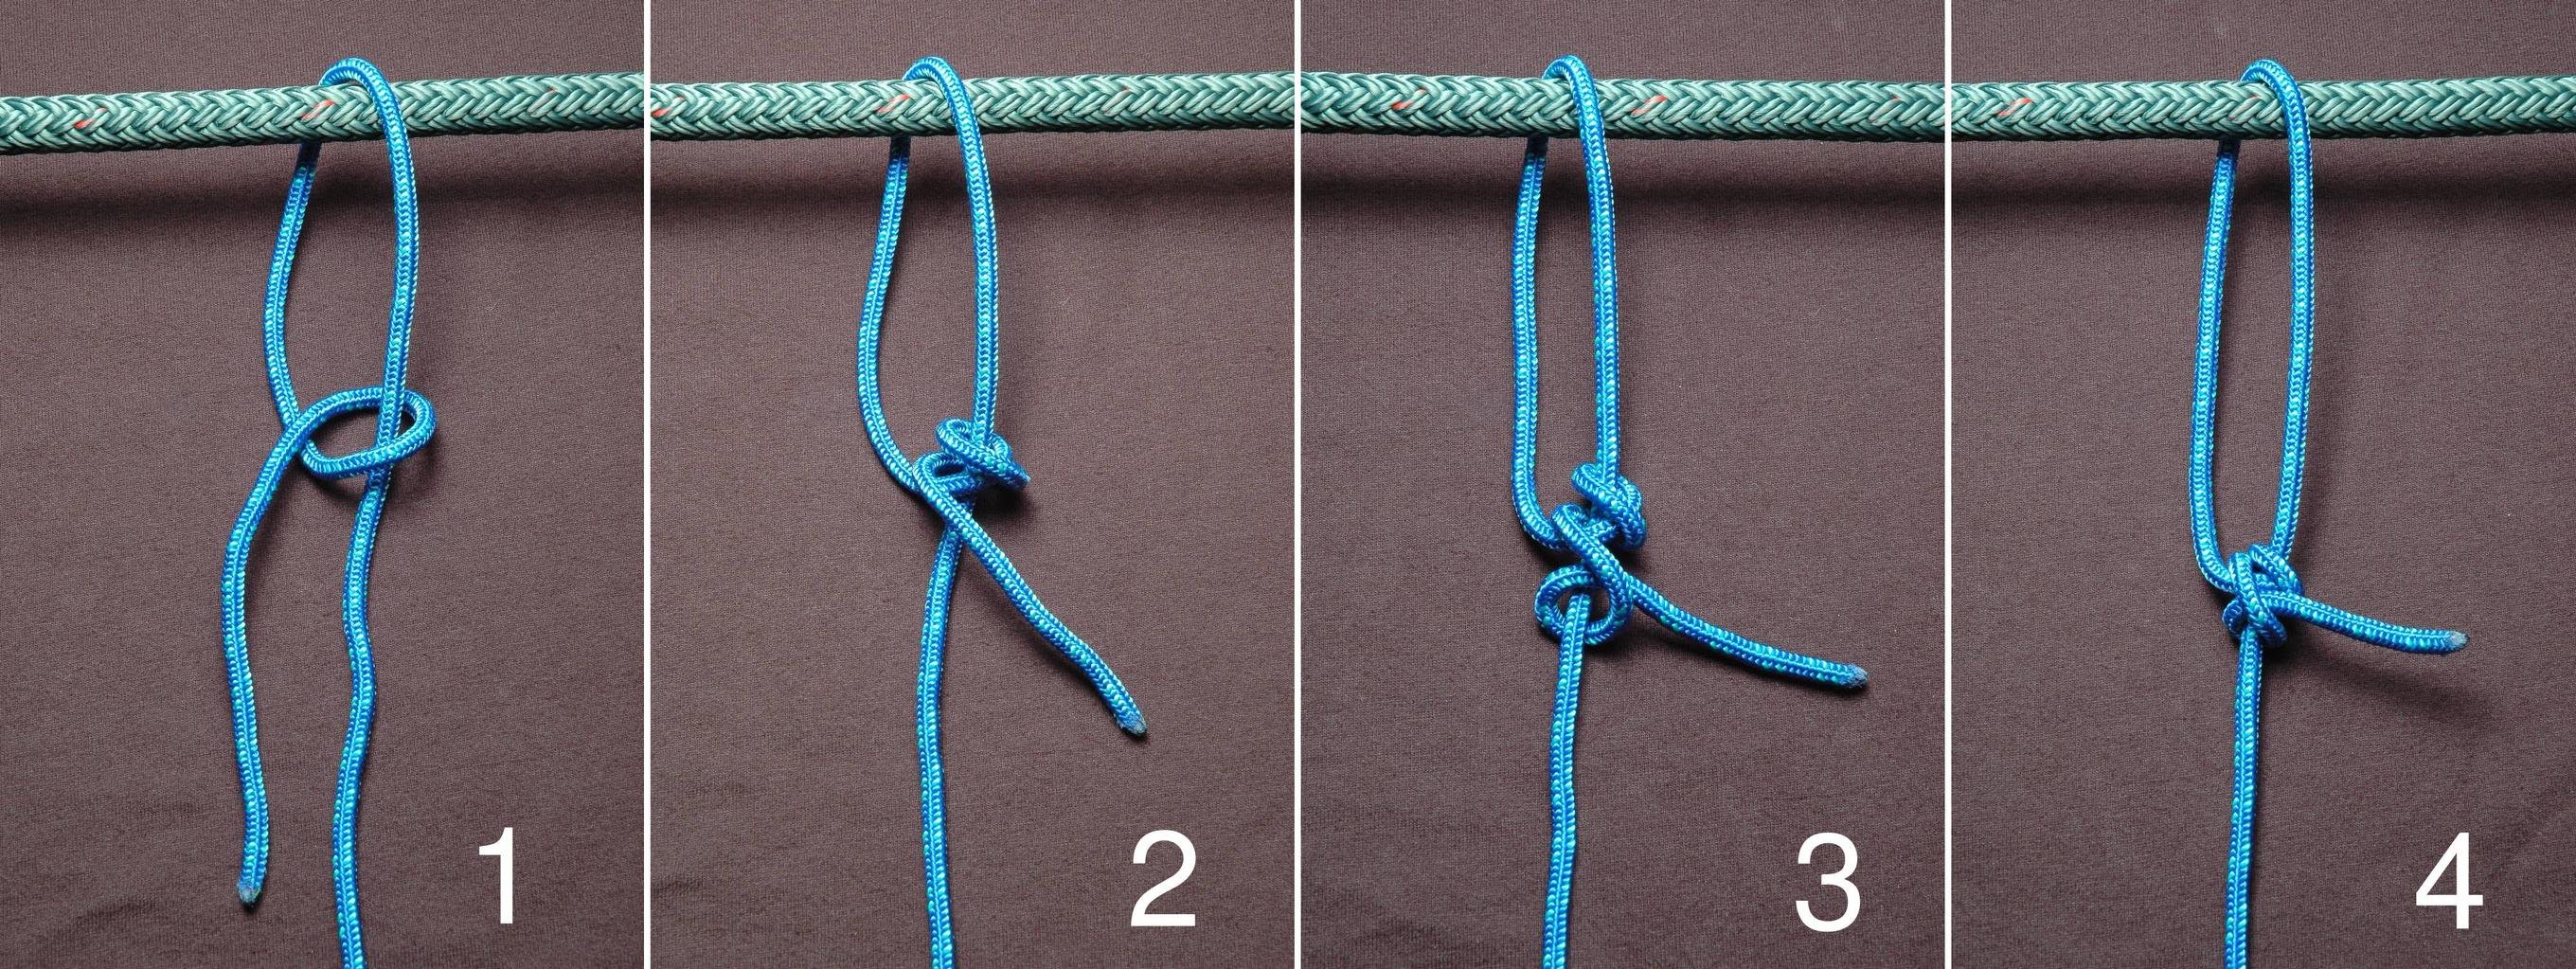 step by step knot instructions